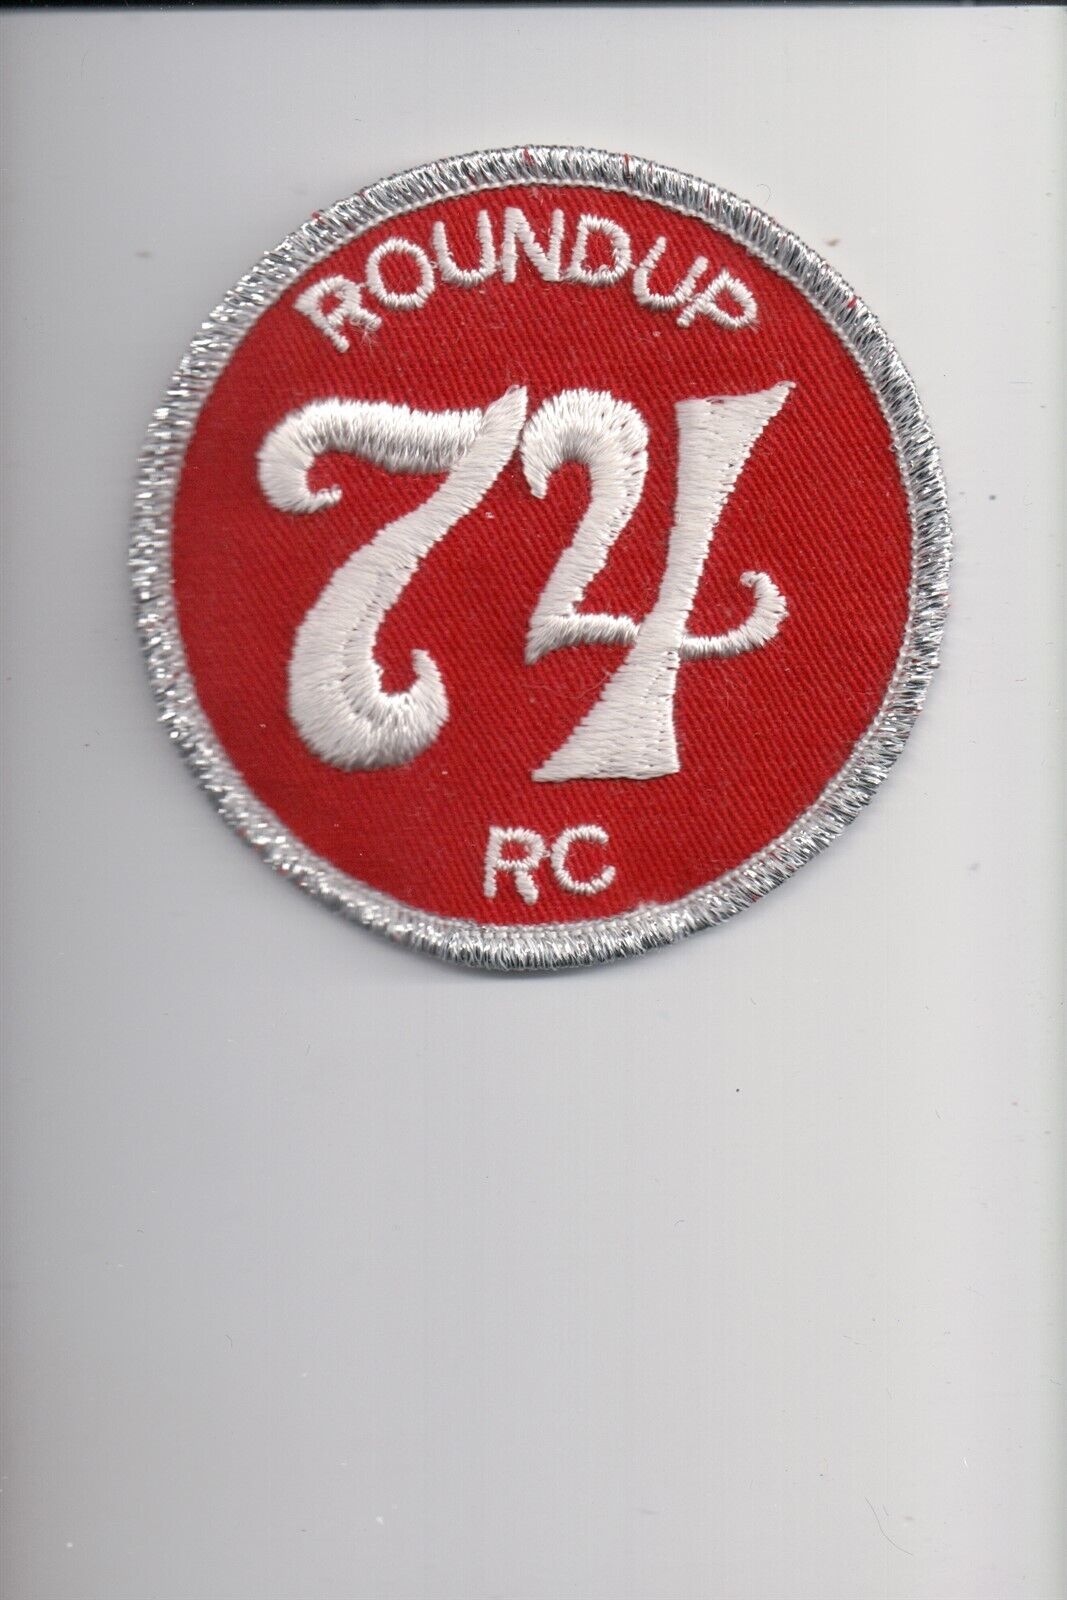 1974 RC Roundup patch